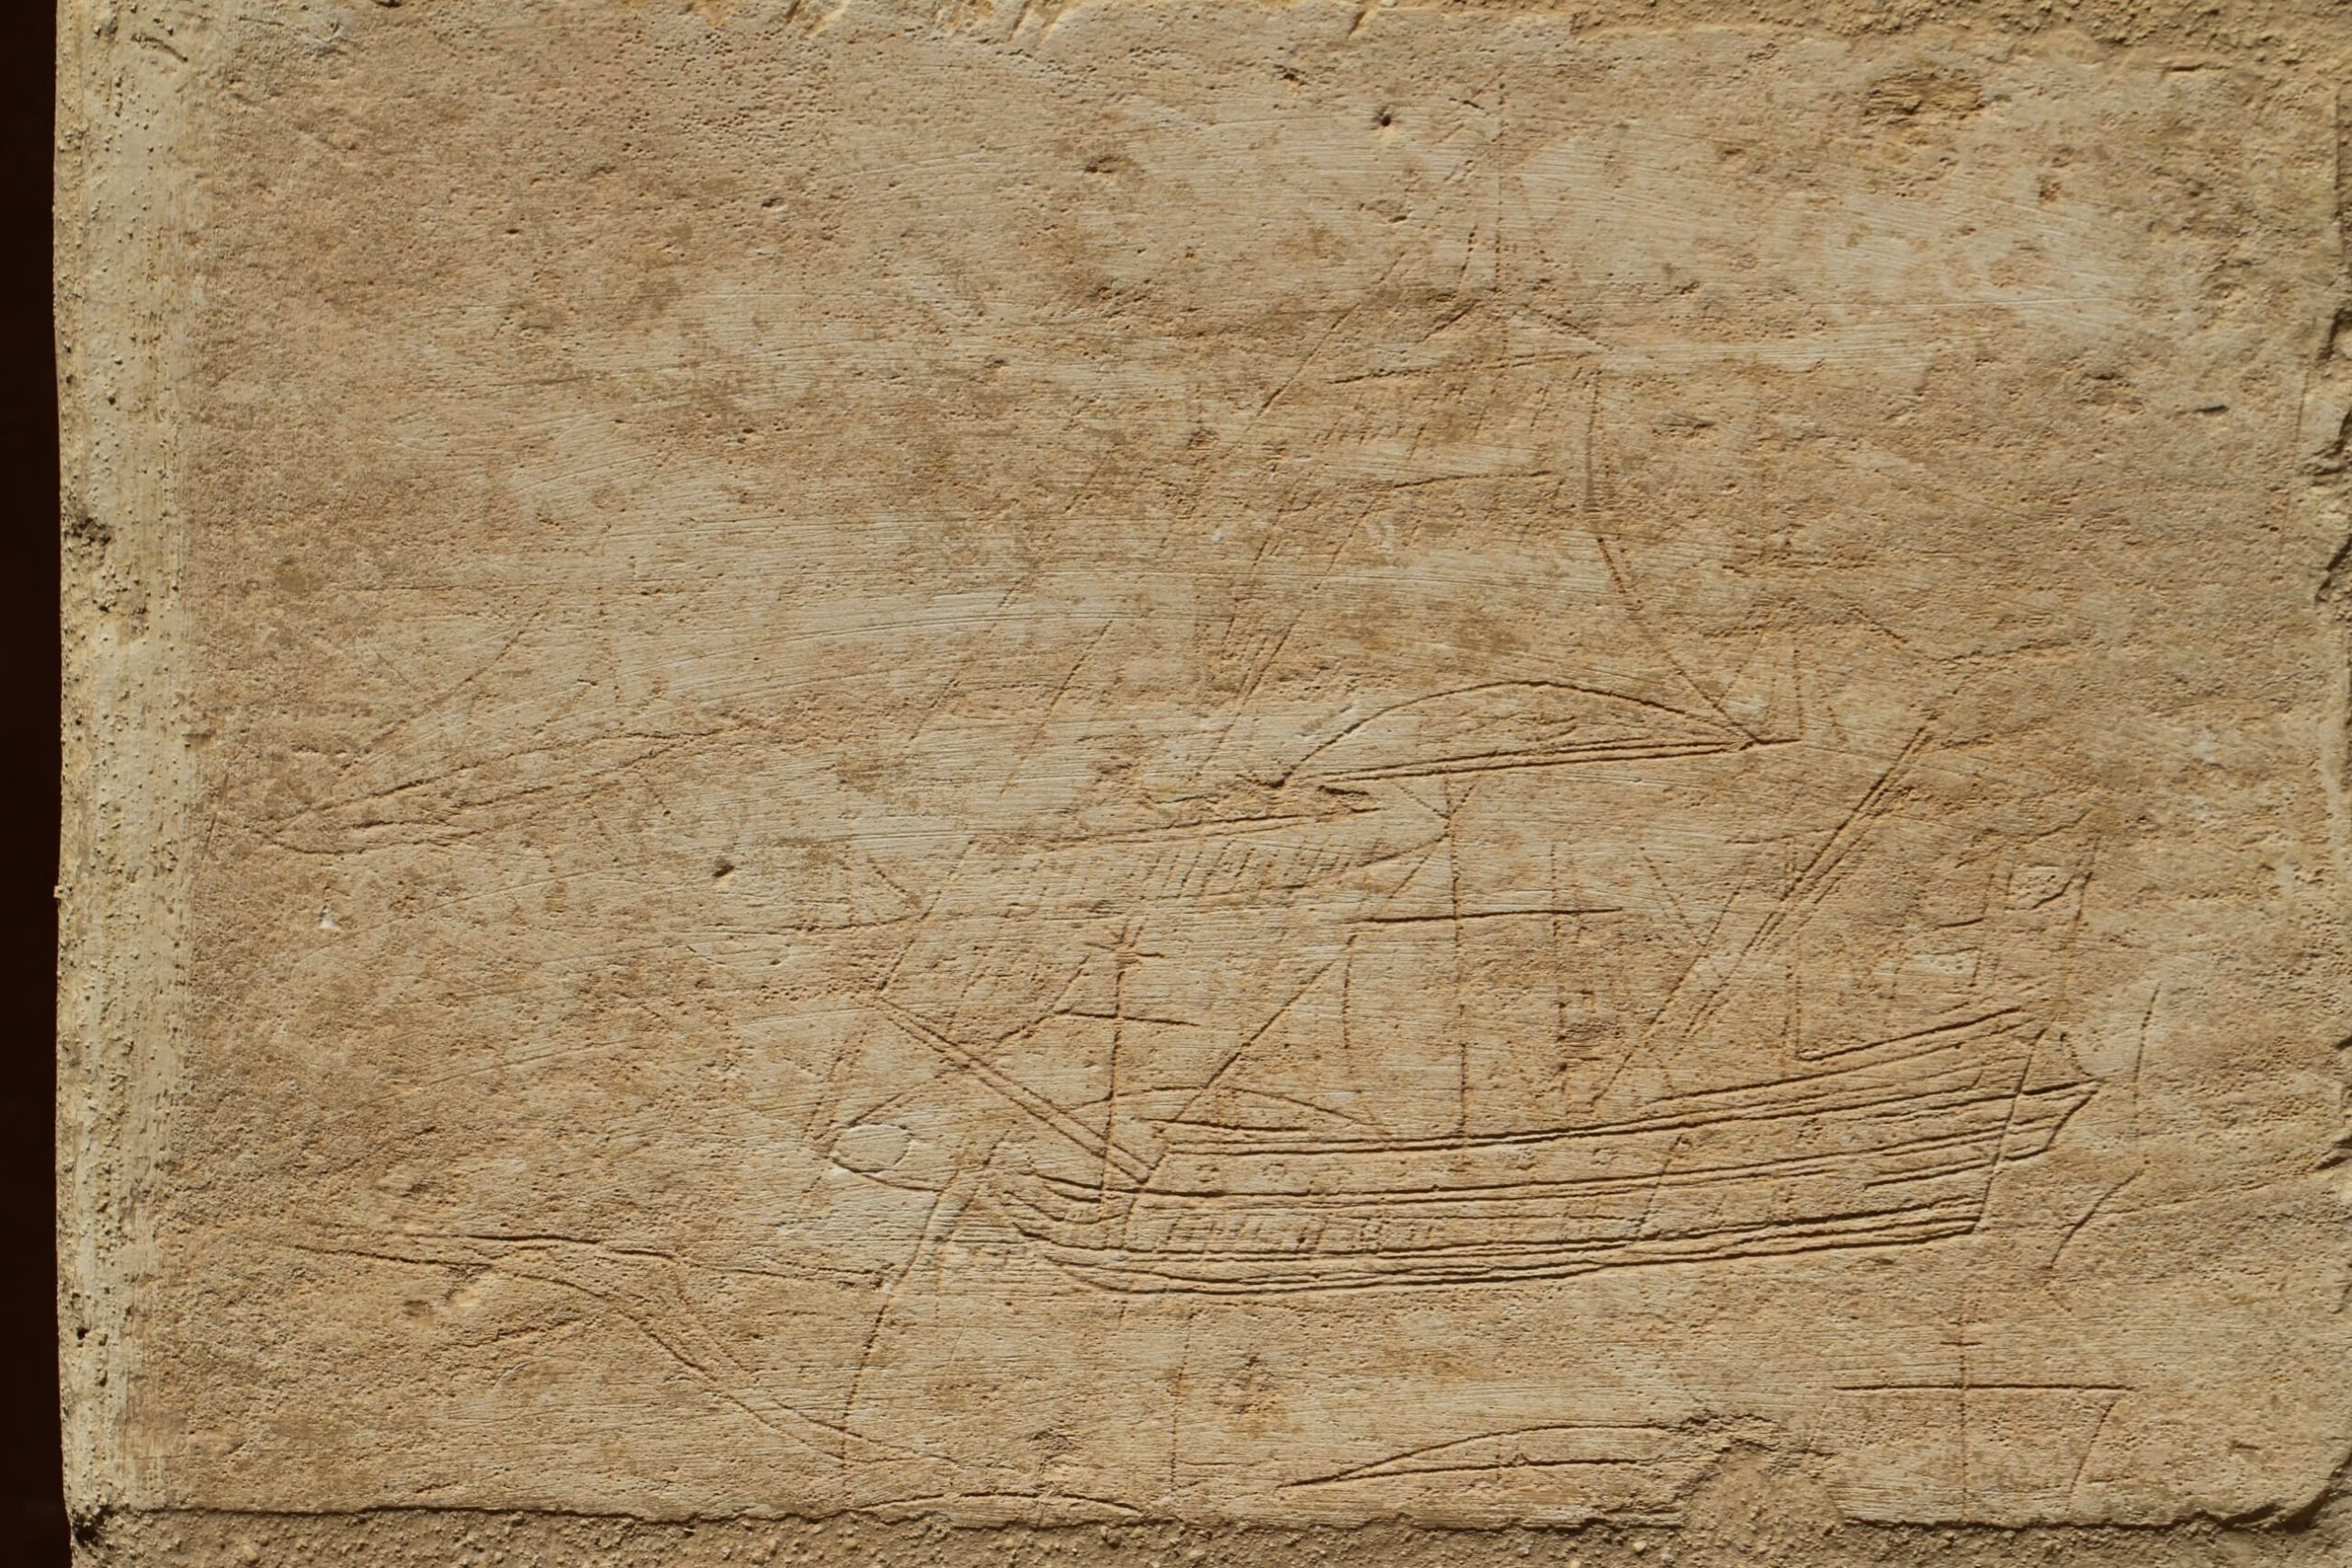 The ship graffito is detailed and realistic. This example is superimposing another ship graffito.